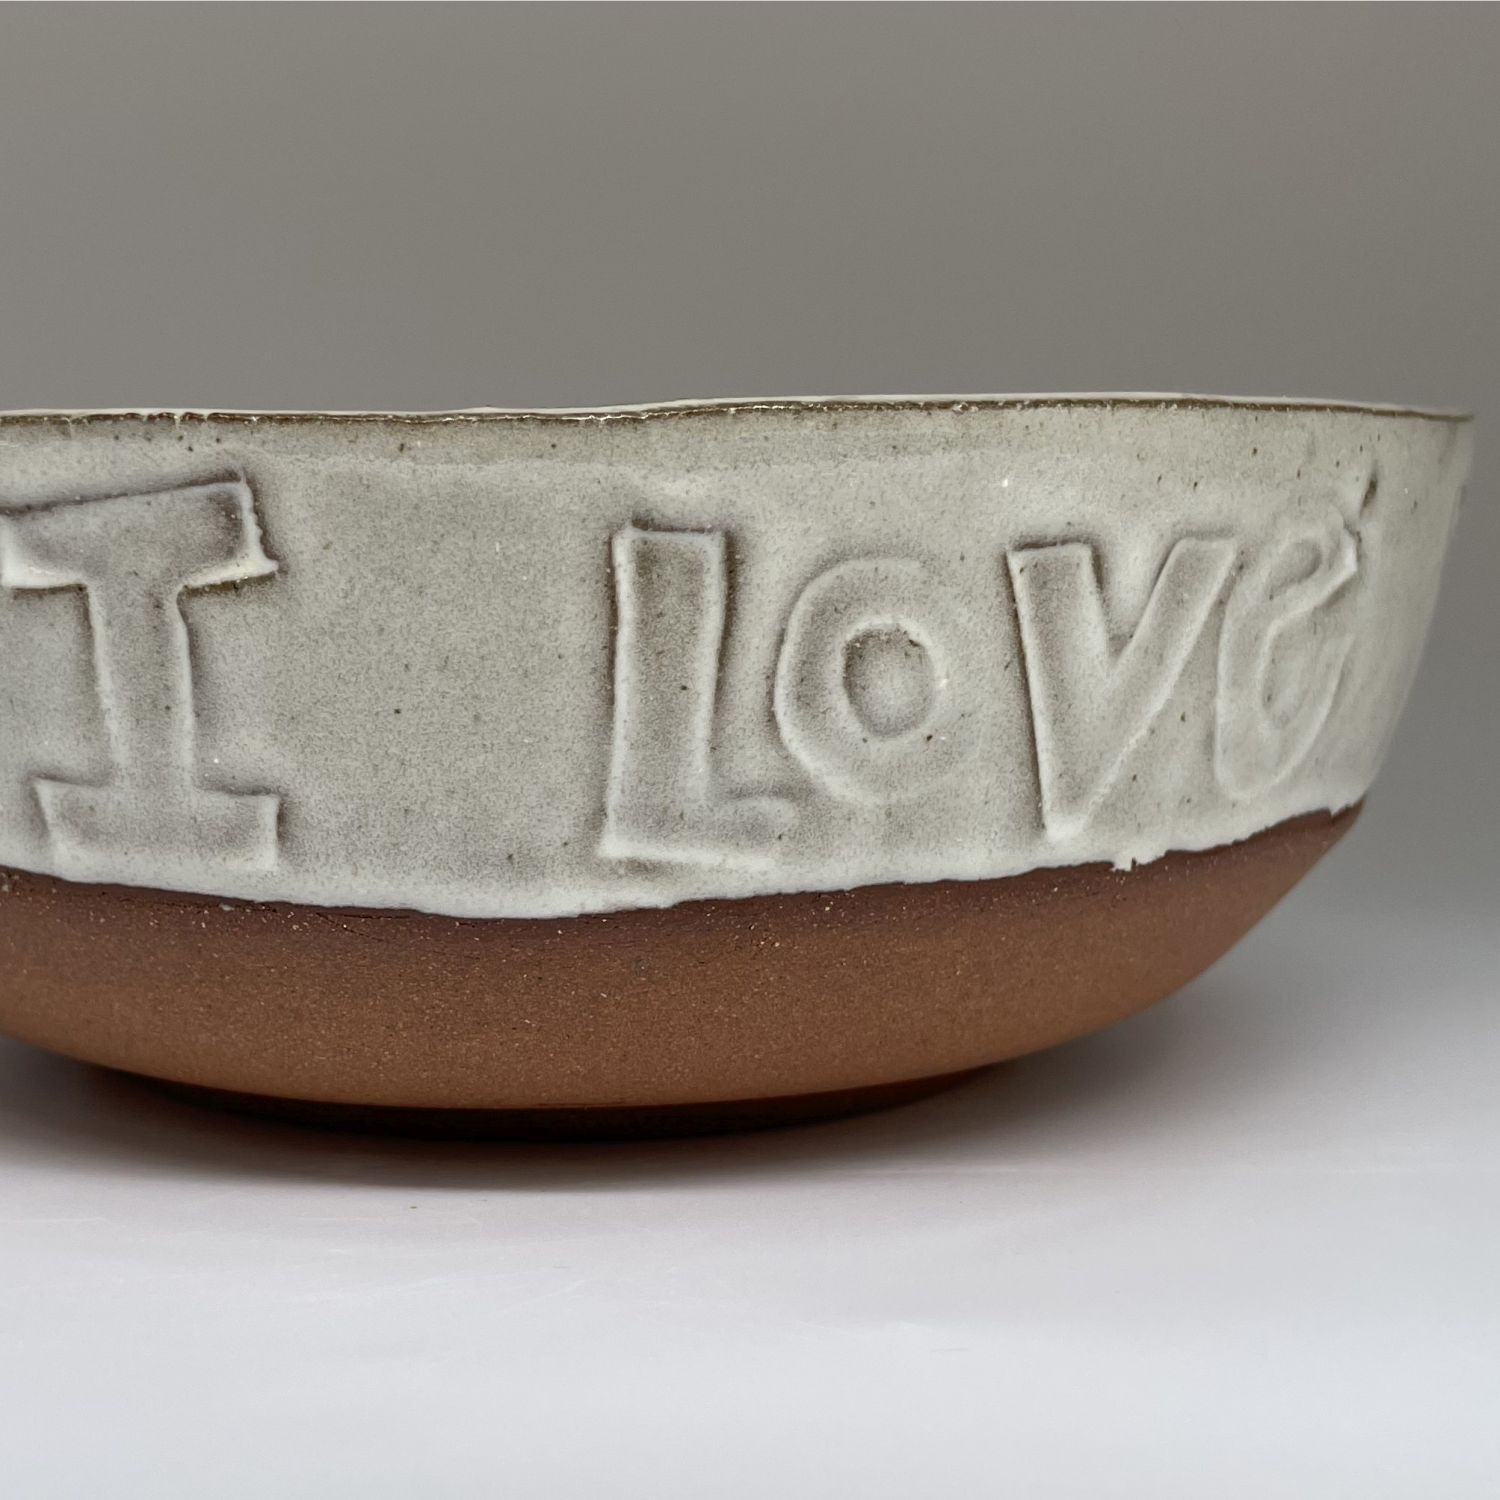 Juana Berinstein: Small Bowl – First of All I Love You Product Image 1 of 4